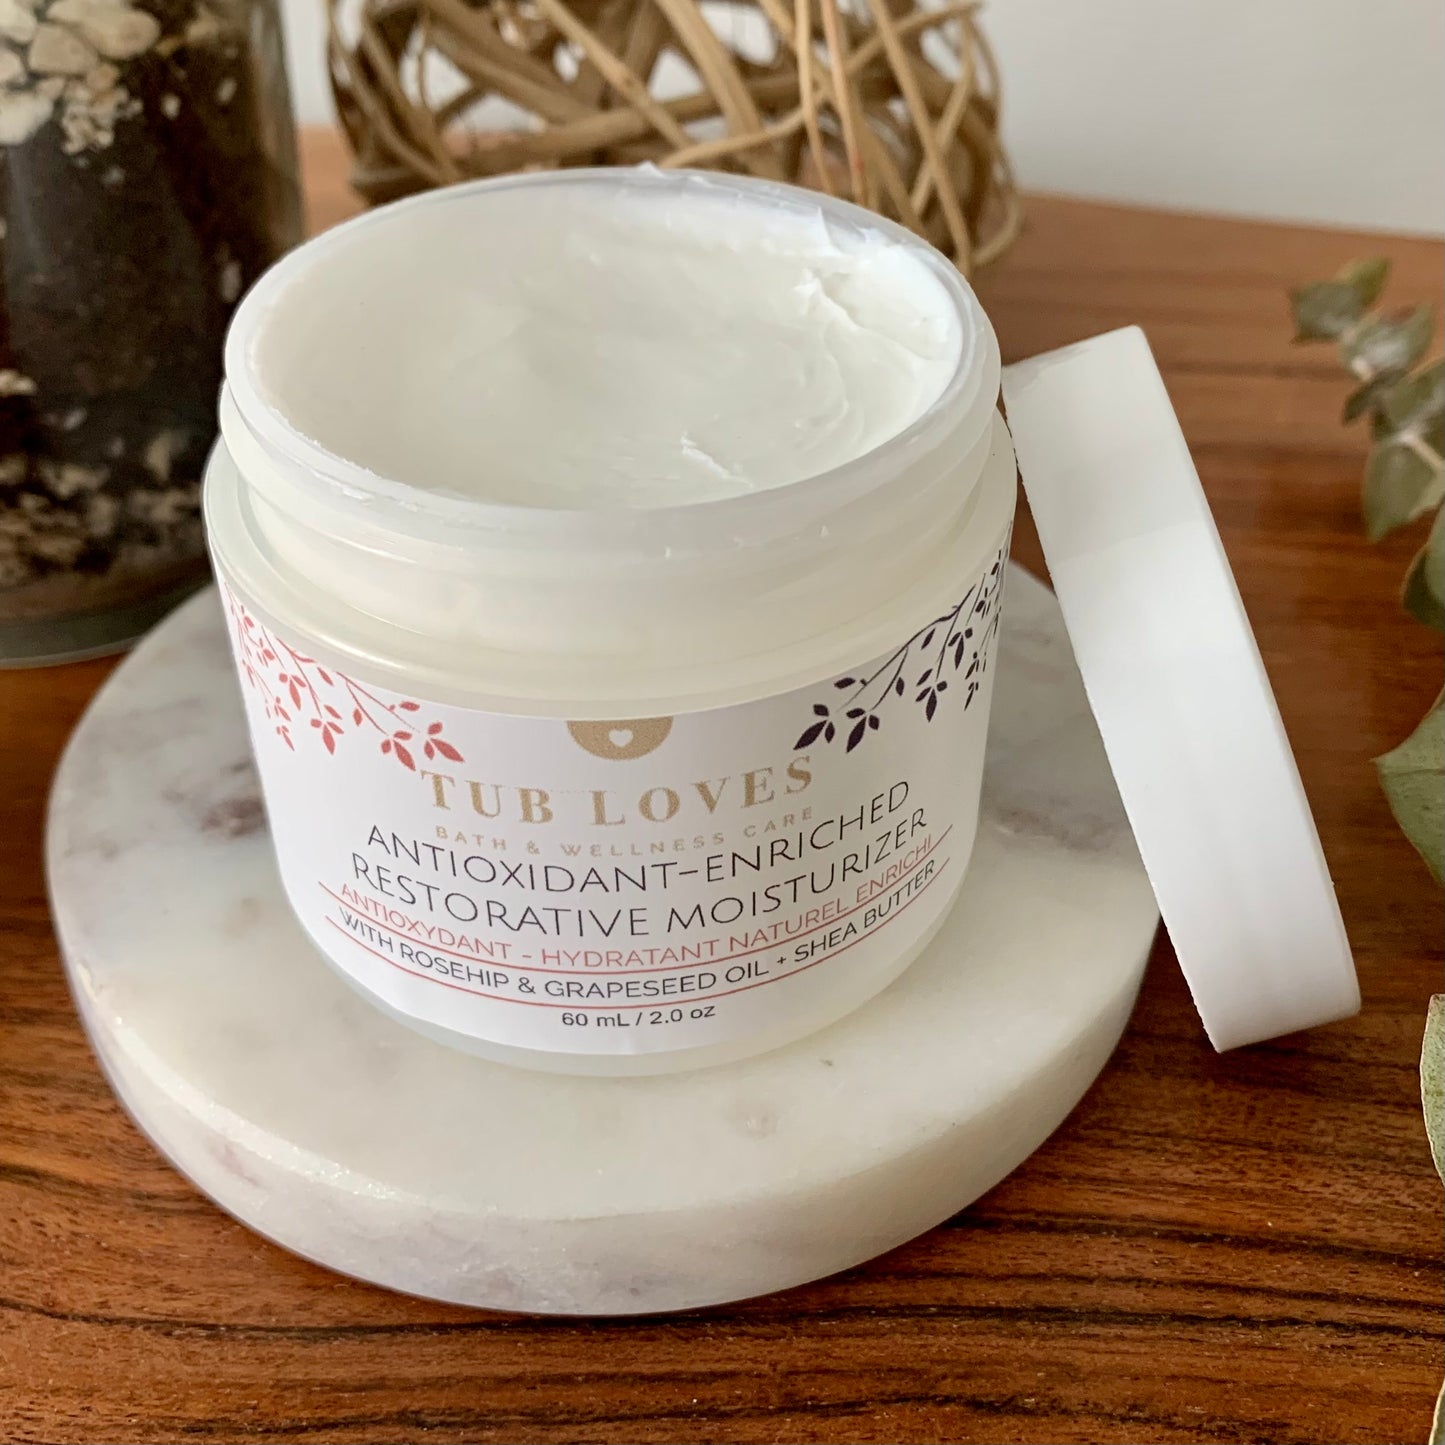 Hydrating Facial Cleanser + Antioxidant-Enriched Moisturizer